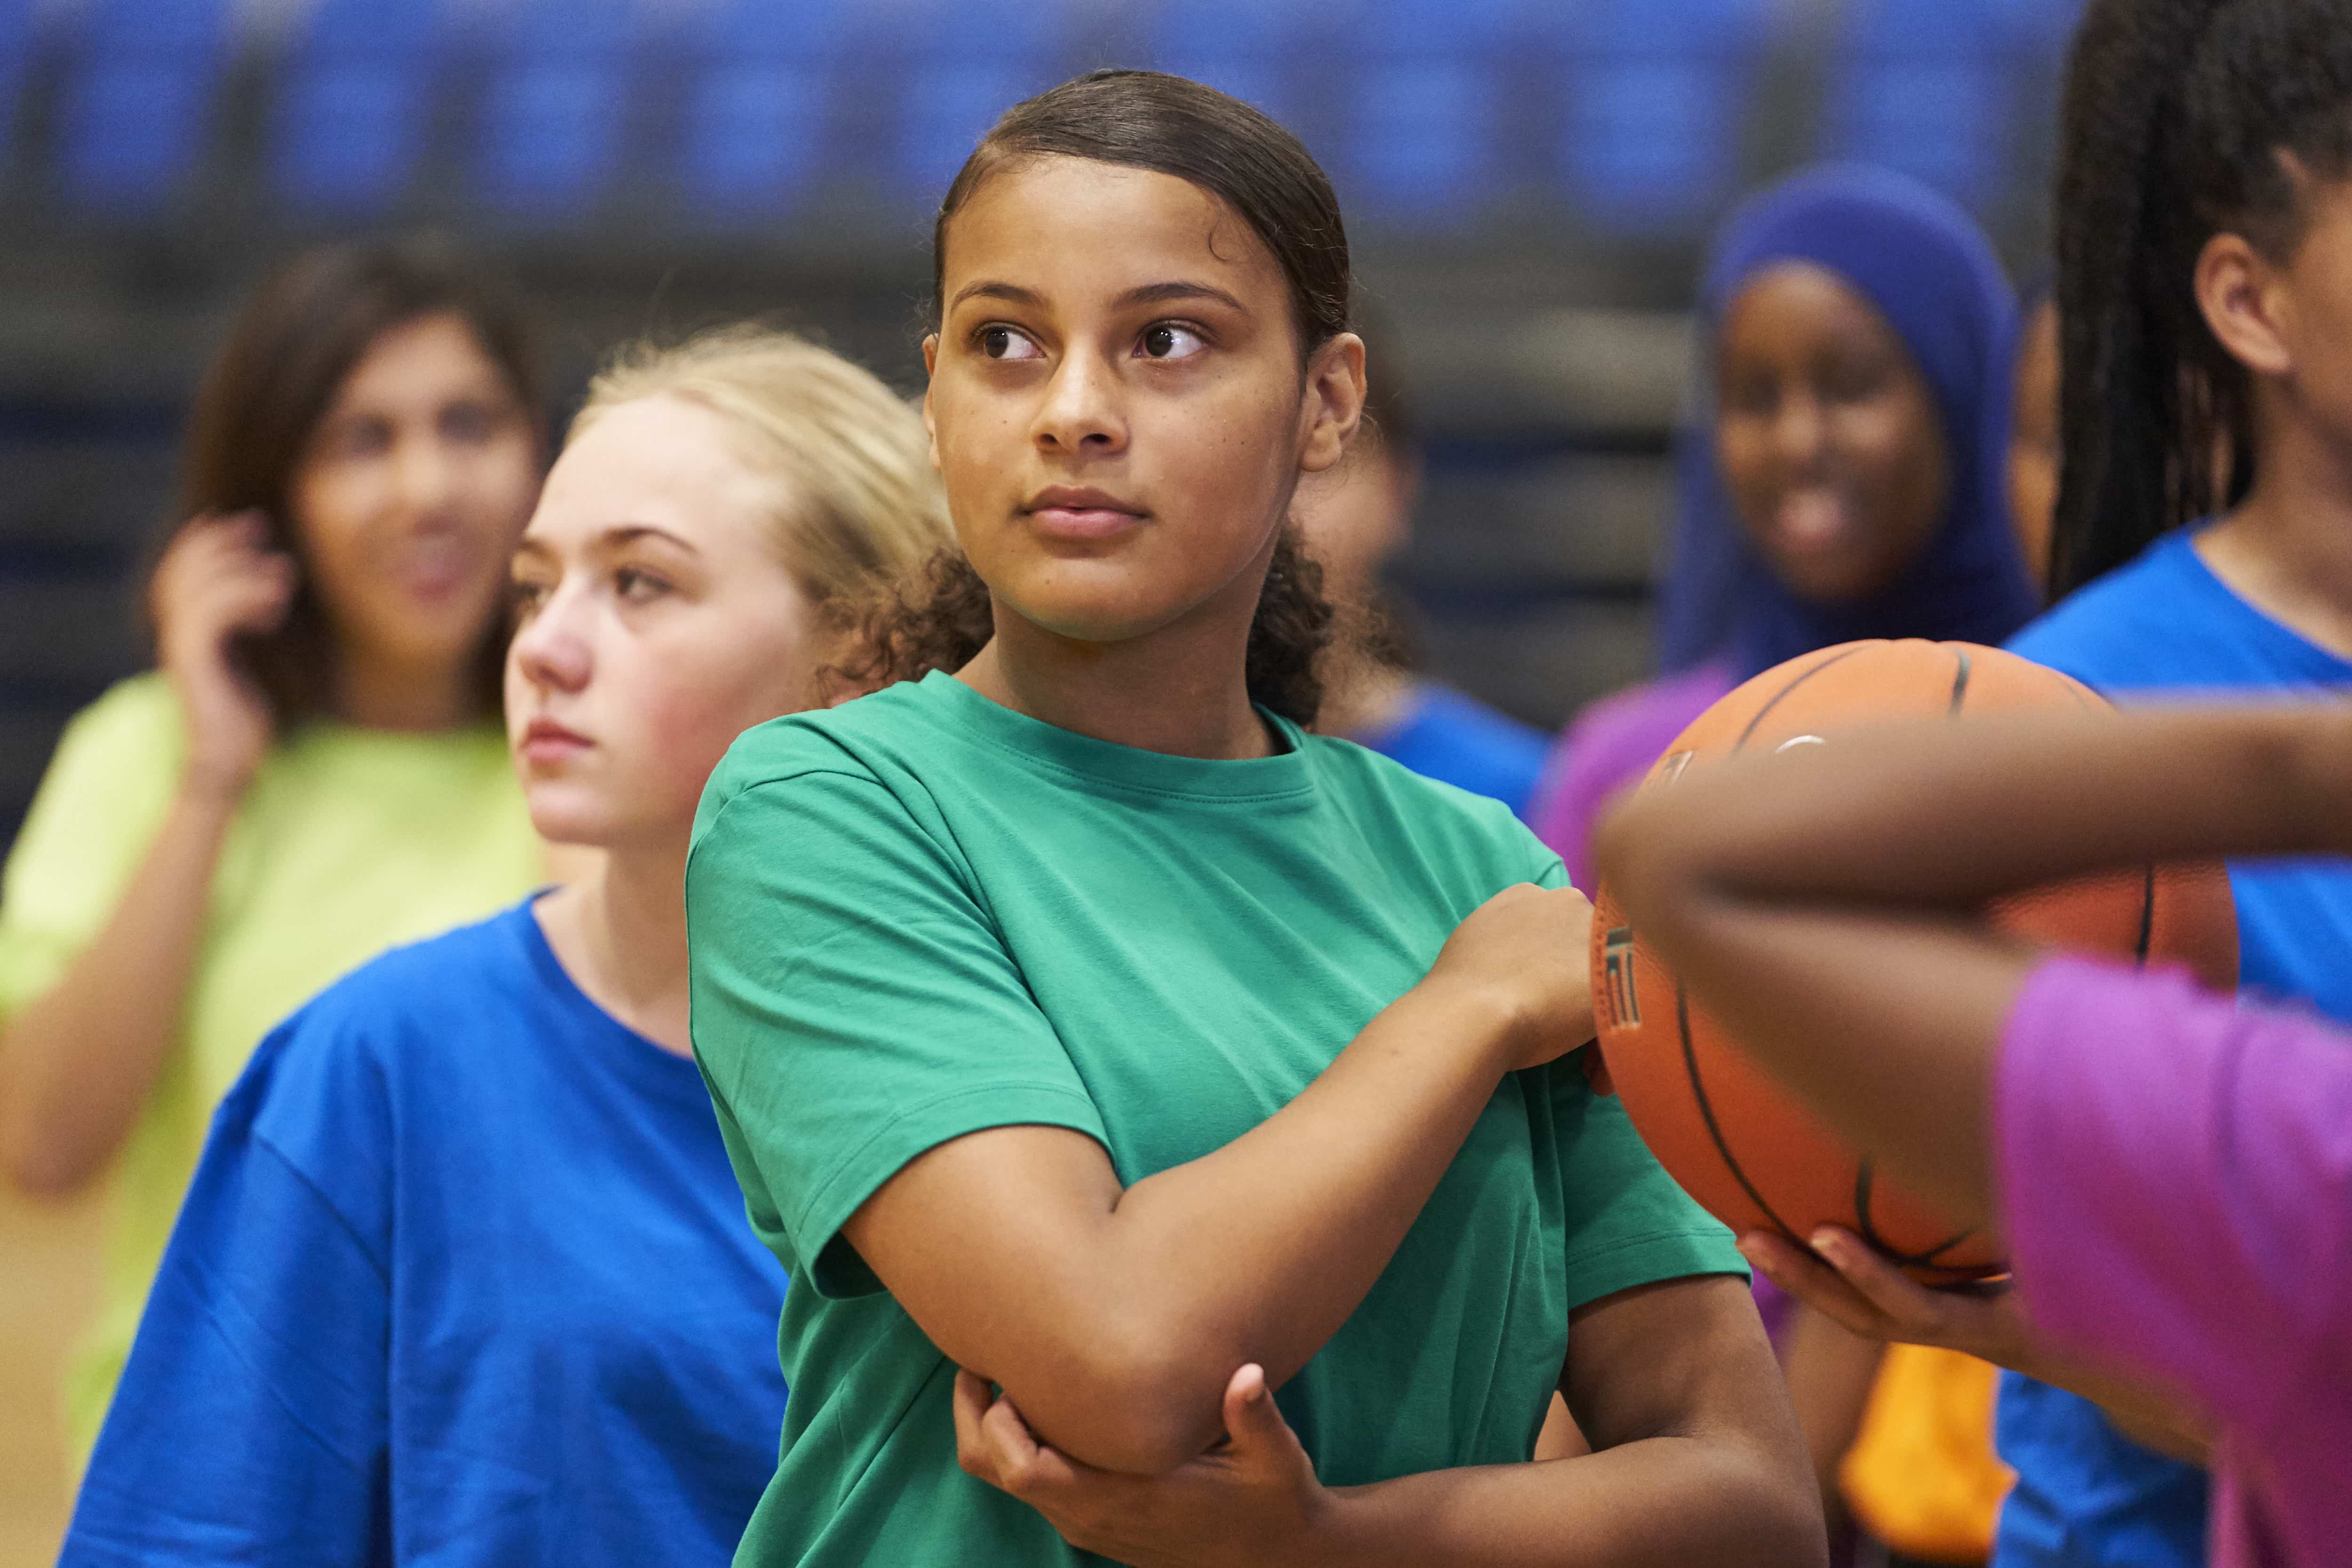 girls playing basketball indoors in different coloured t-shirts